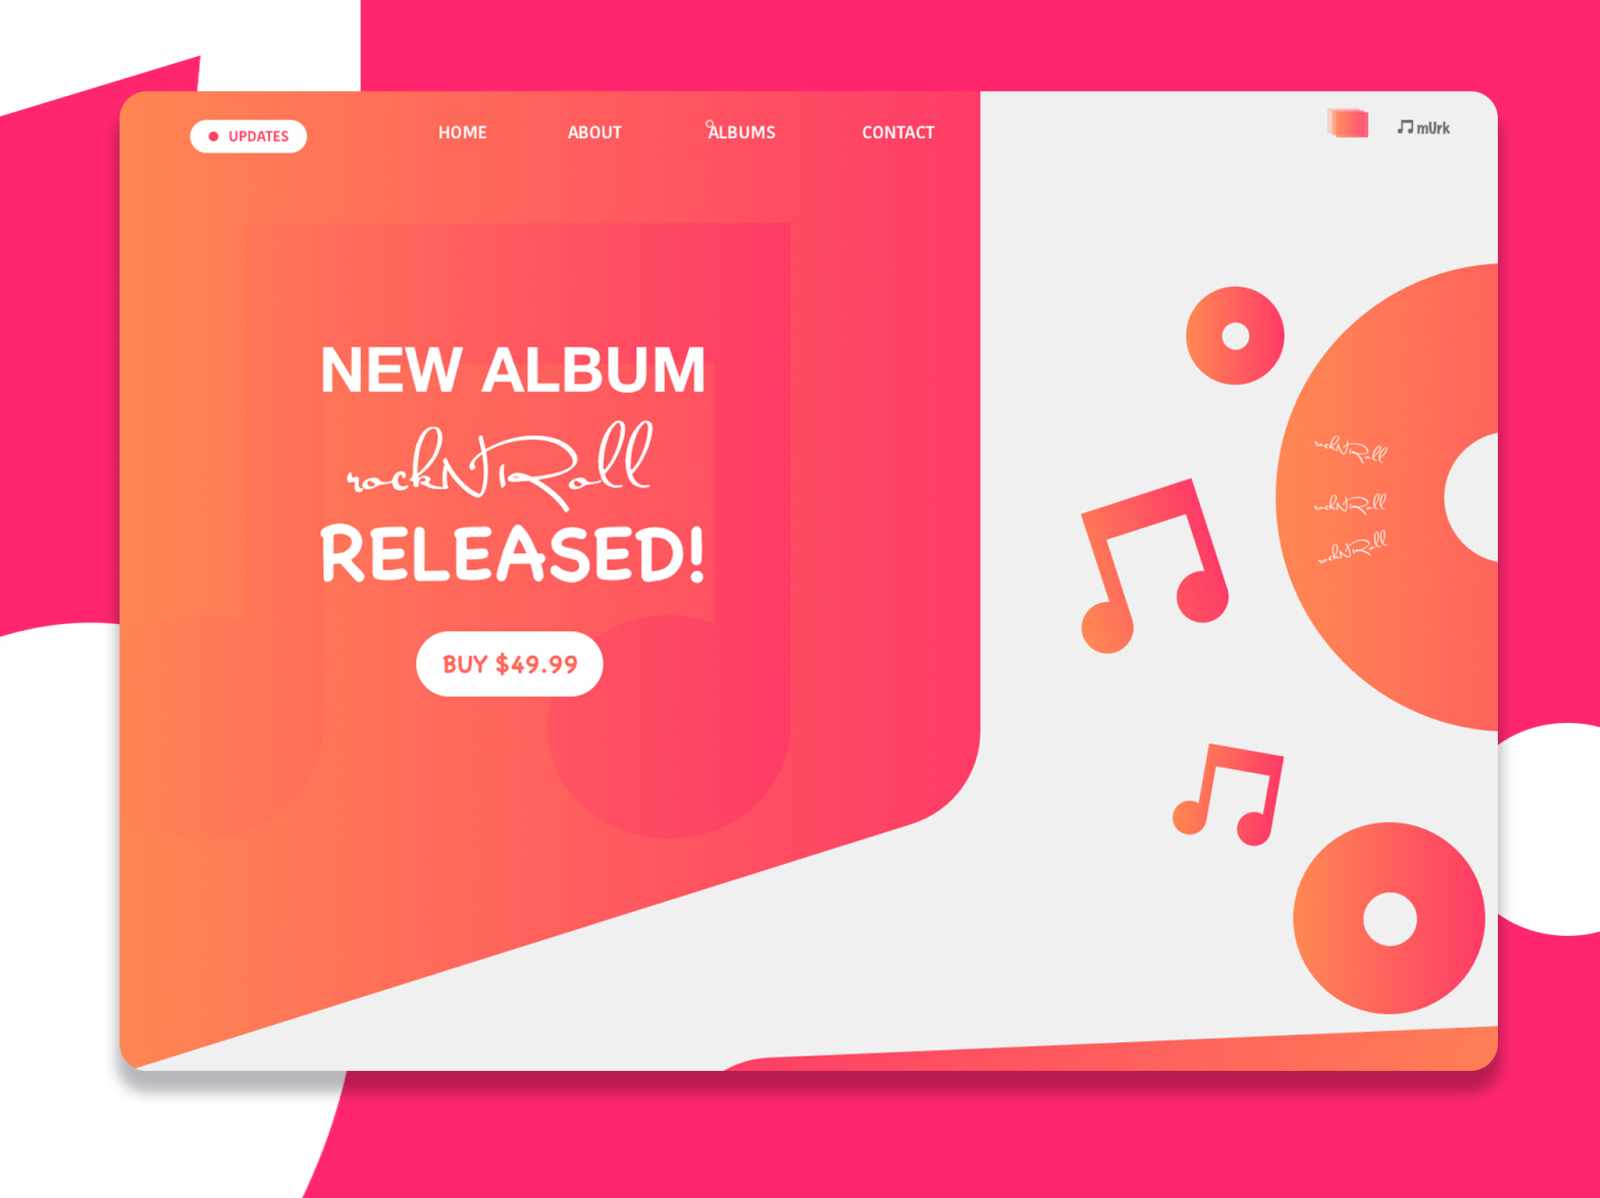 Music Album Release Landing Page Design by Jahid Hasan Soton on Dribbble